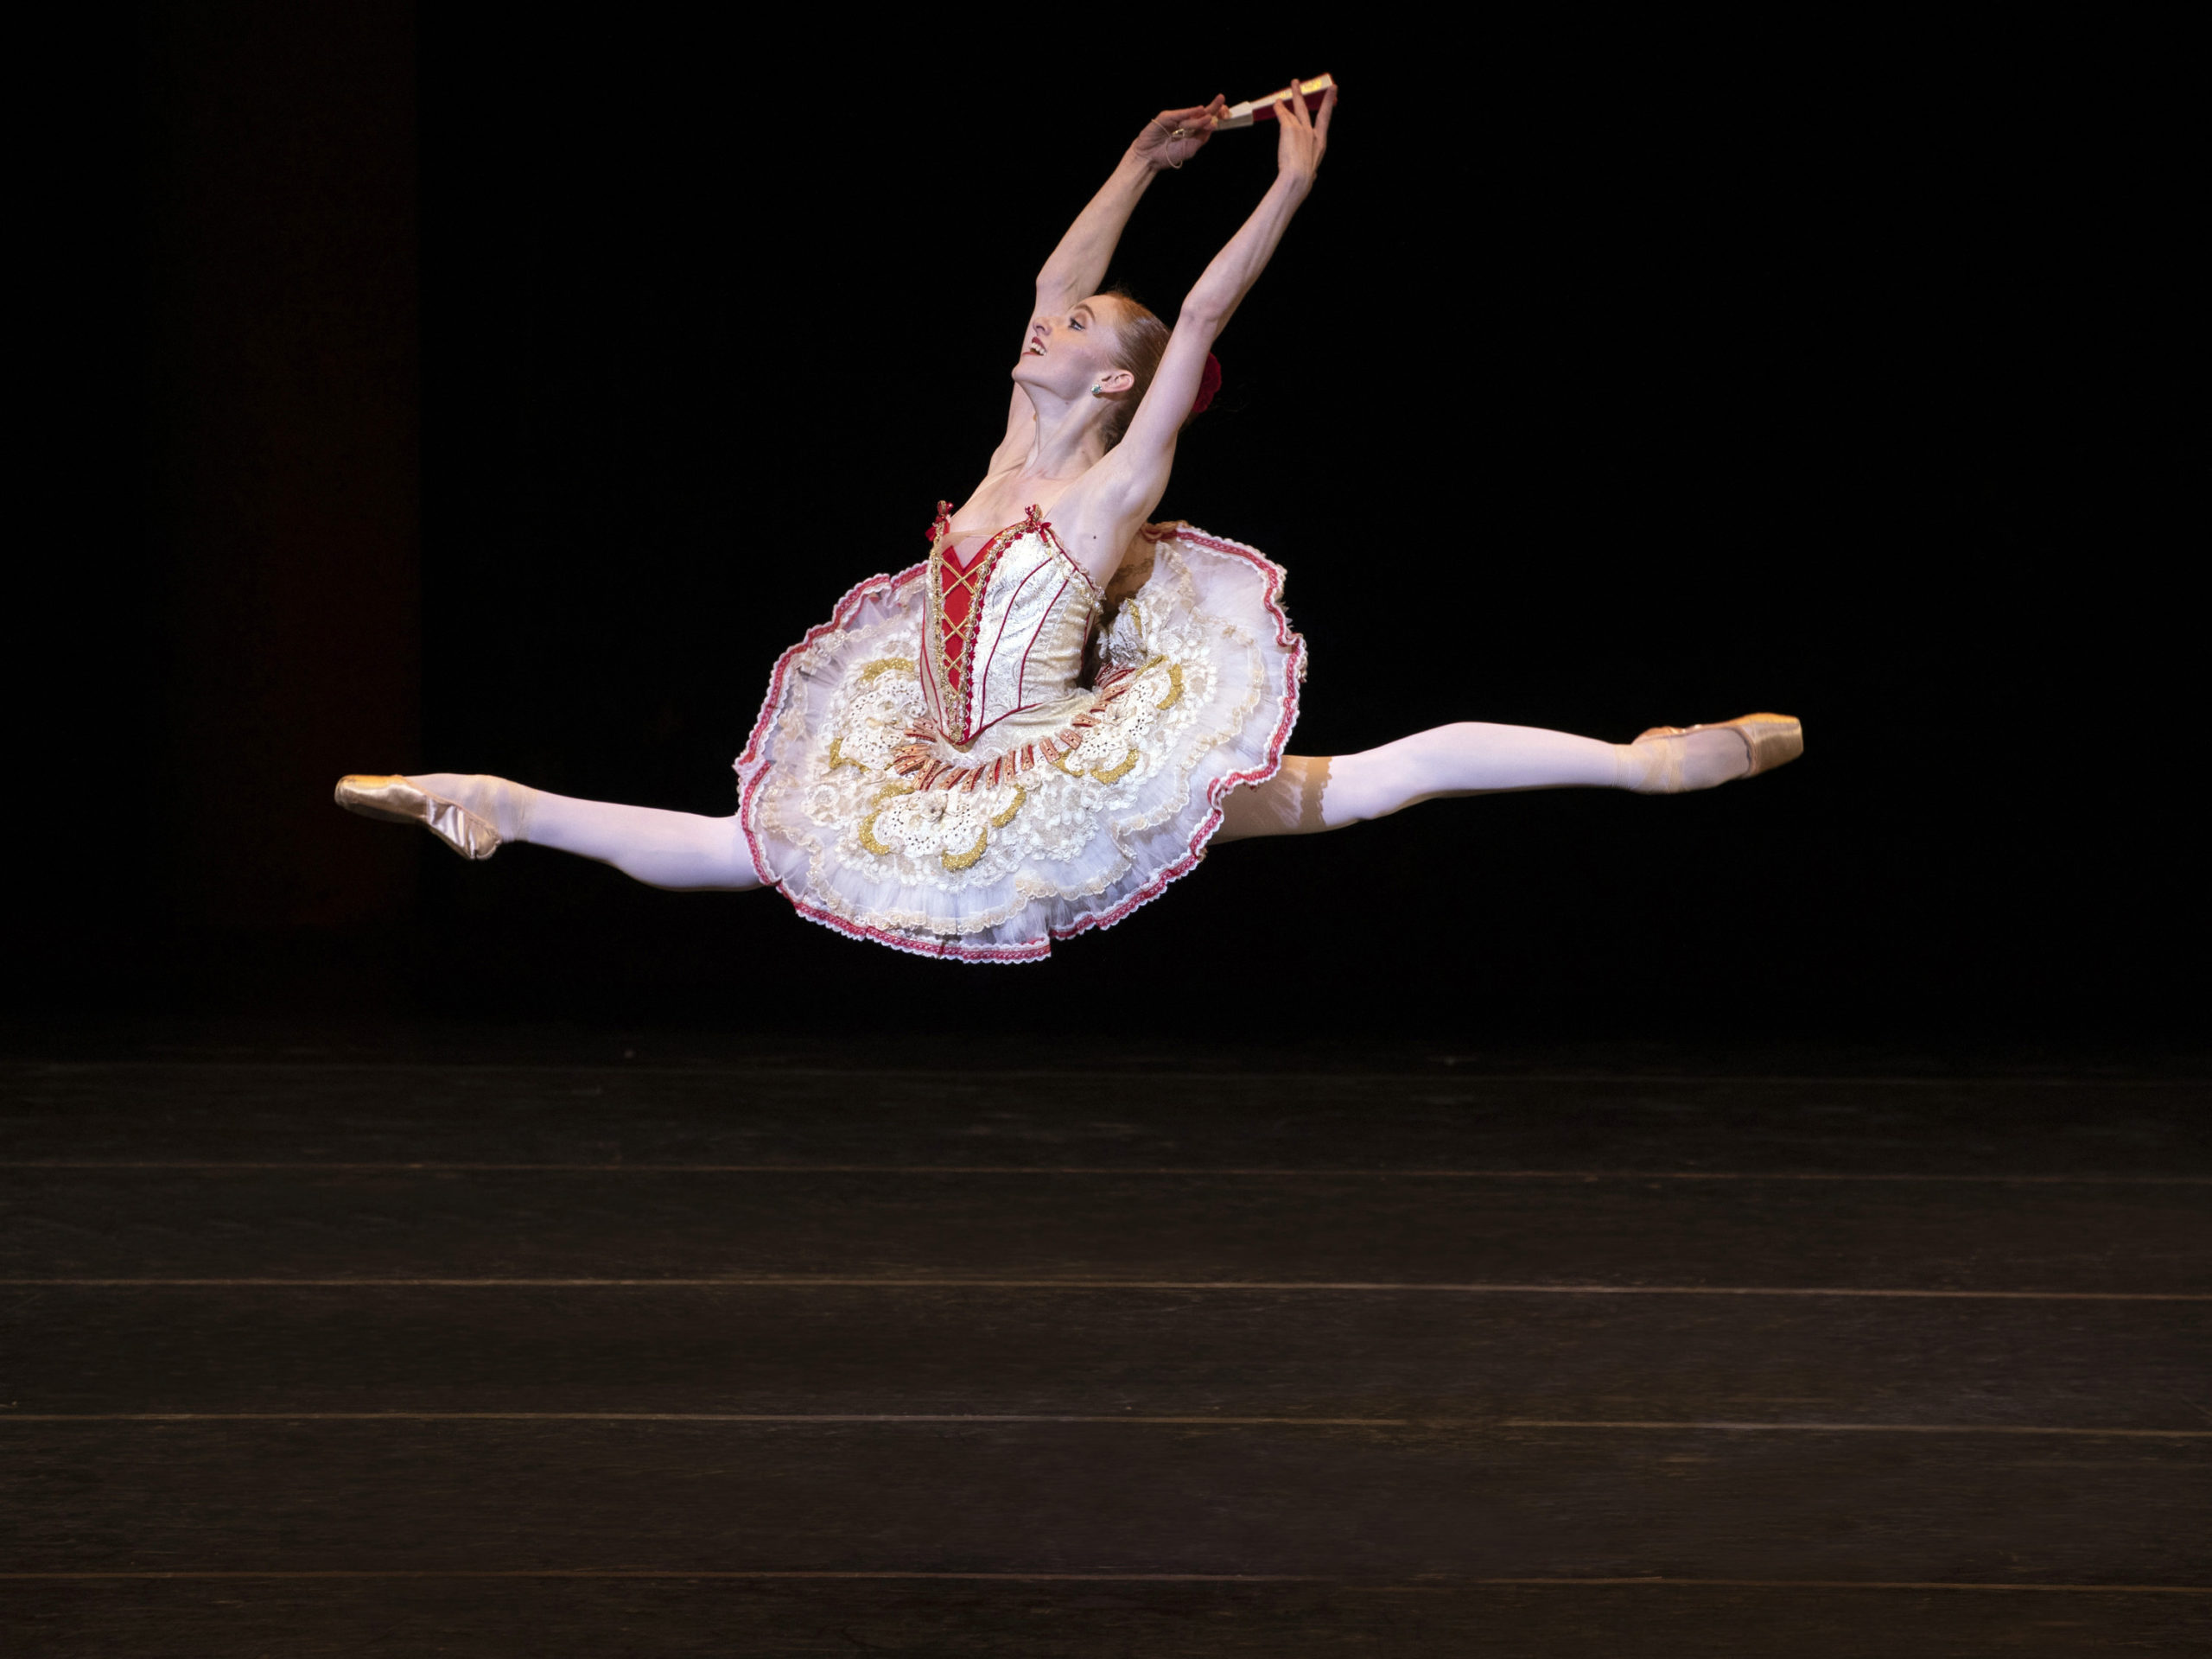 Catherine Hurlin, wearing a white tutu with red and gold trim, flies through the air in a large saut de chat towards stage right. With her arms in high fifth, she holds a closed fan in her right hand and a wears a huge smile on her face.